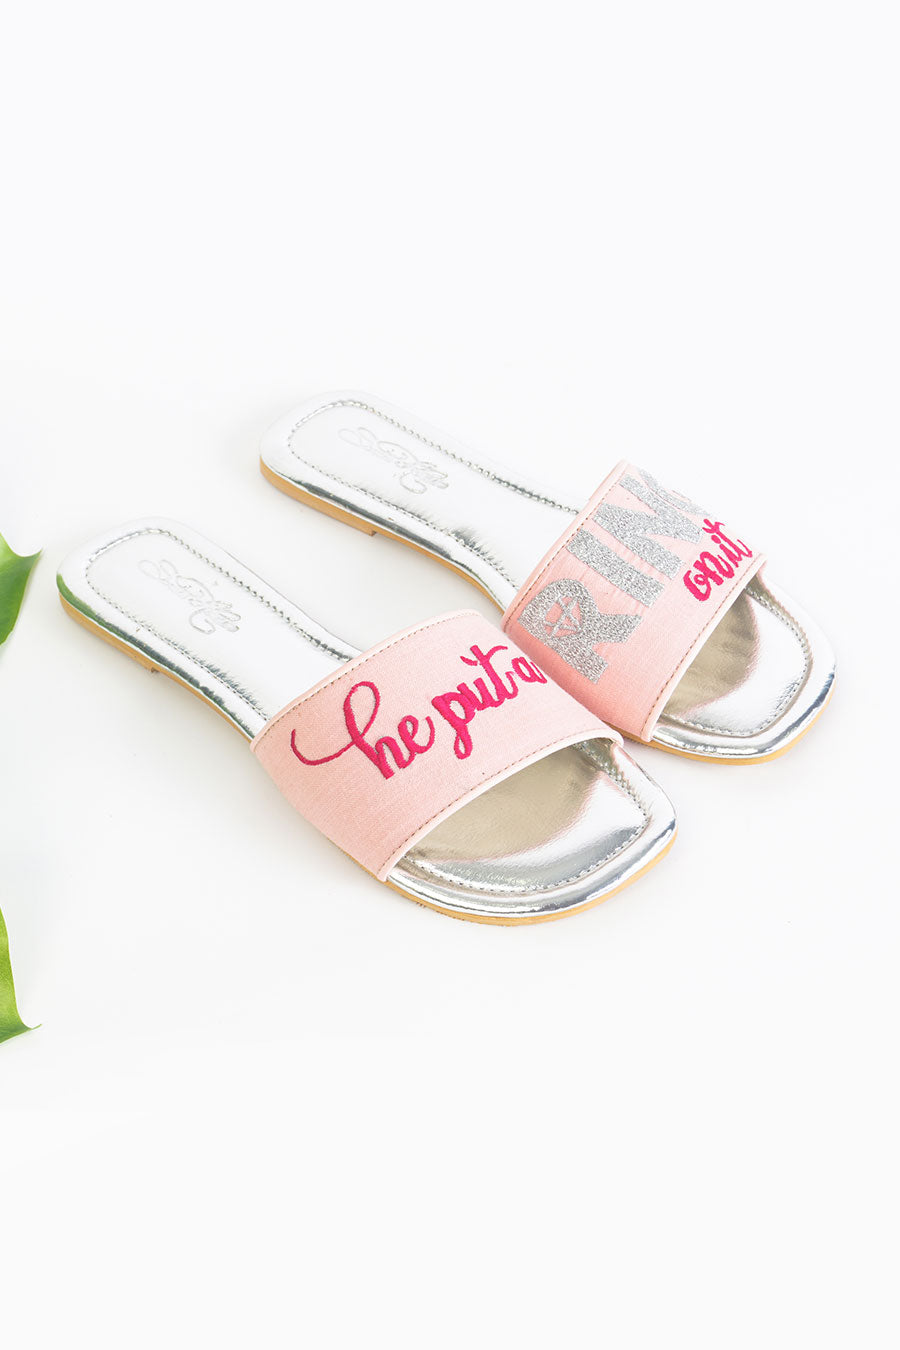 He Put a Ring on it - Embroidered Flats